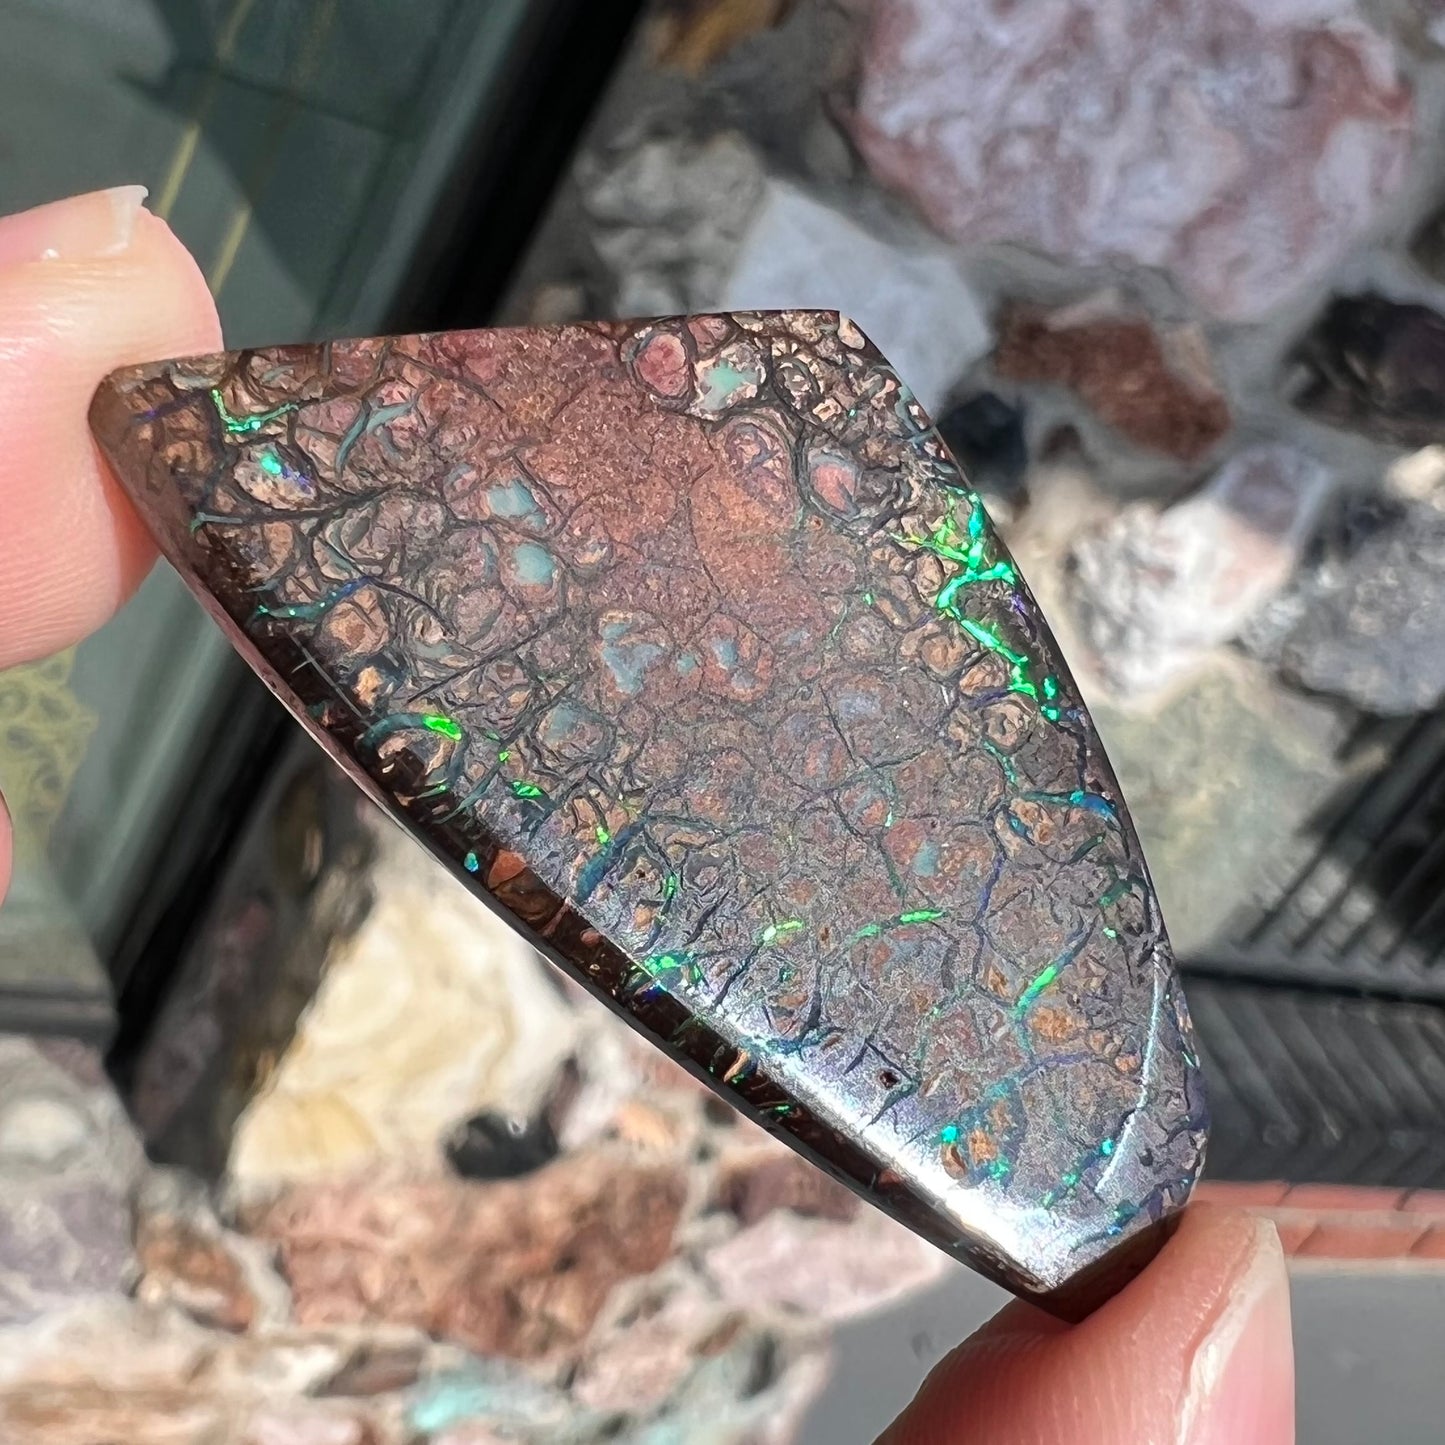 A loose, patterned boulder opal stone from the Koroit Mining District in Queensland, Australia.